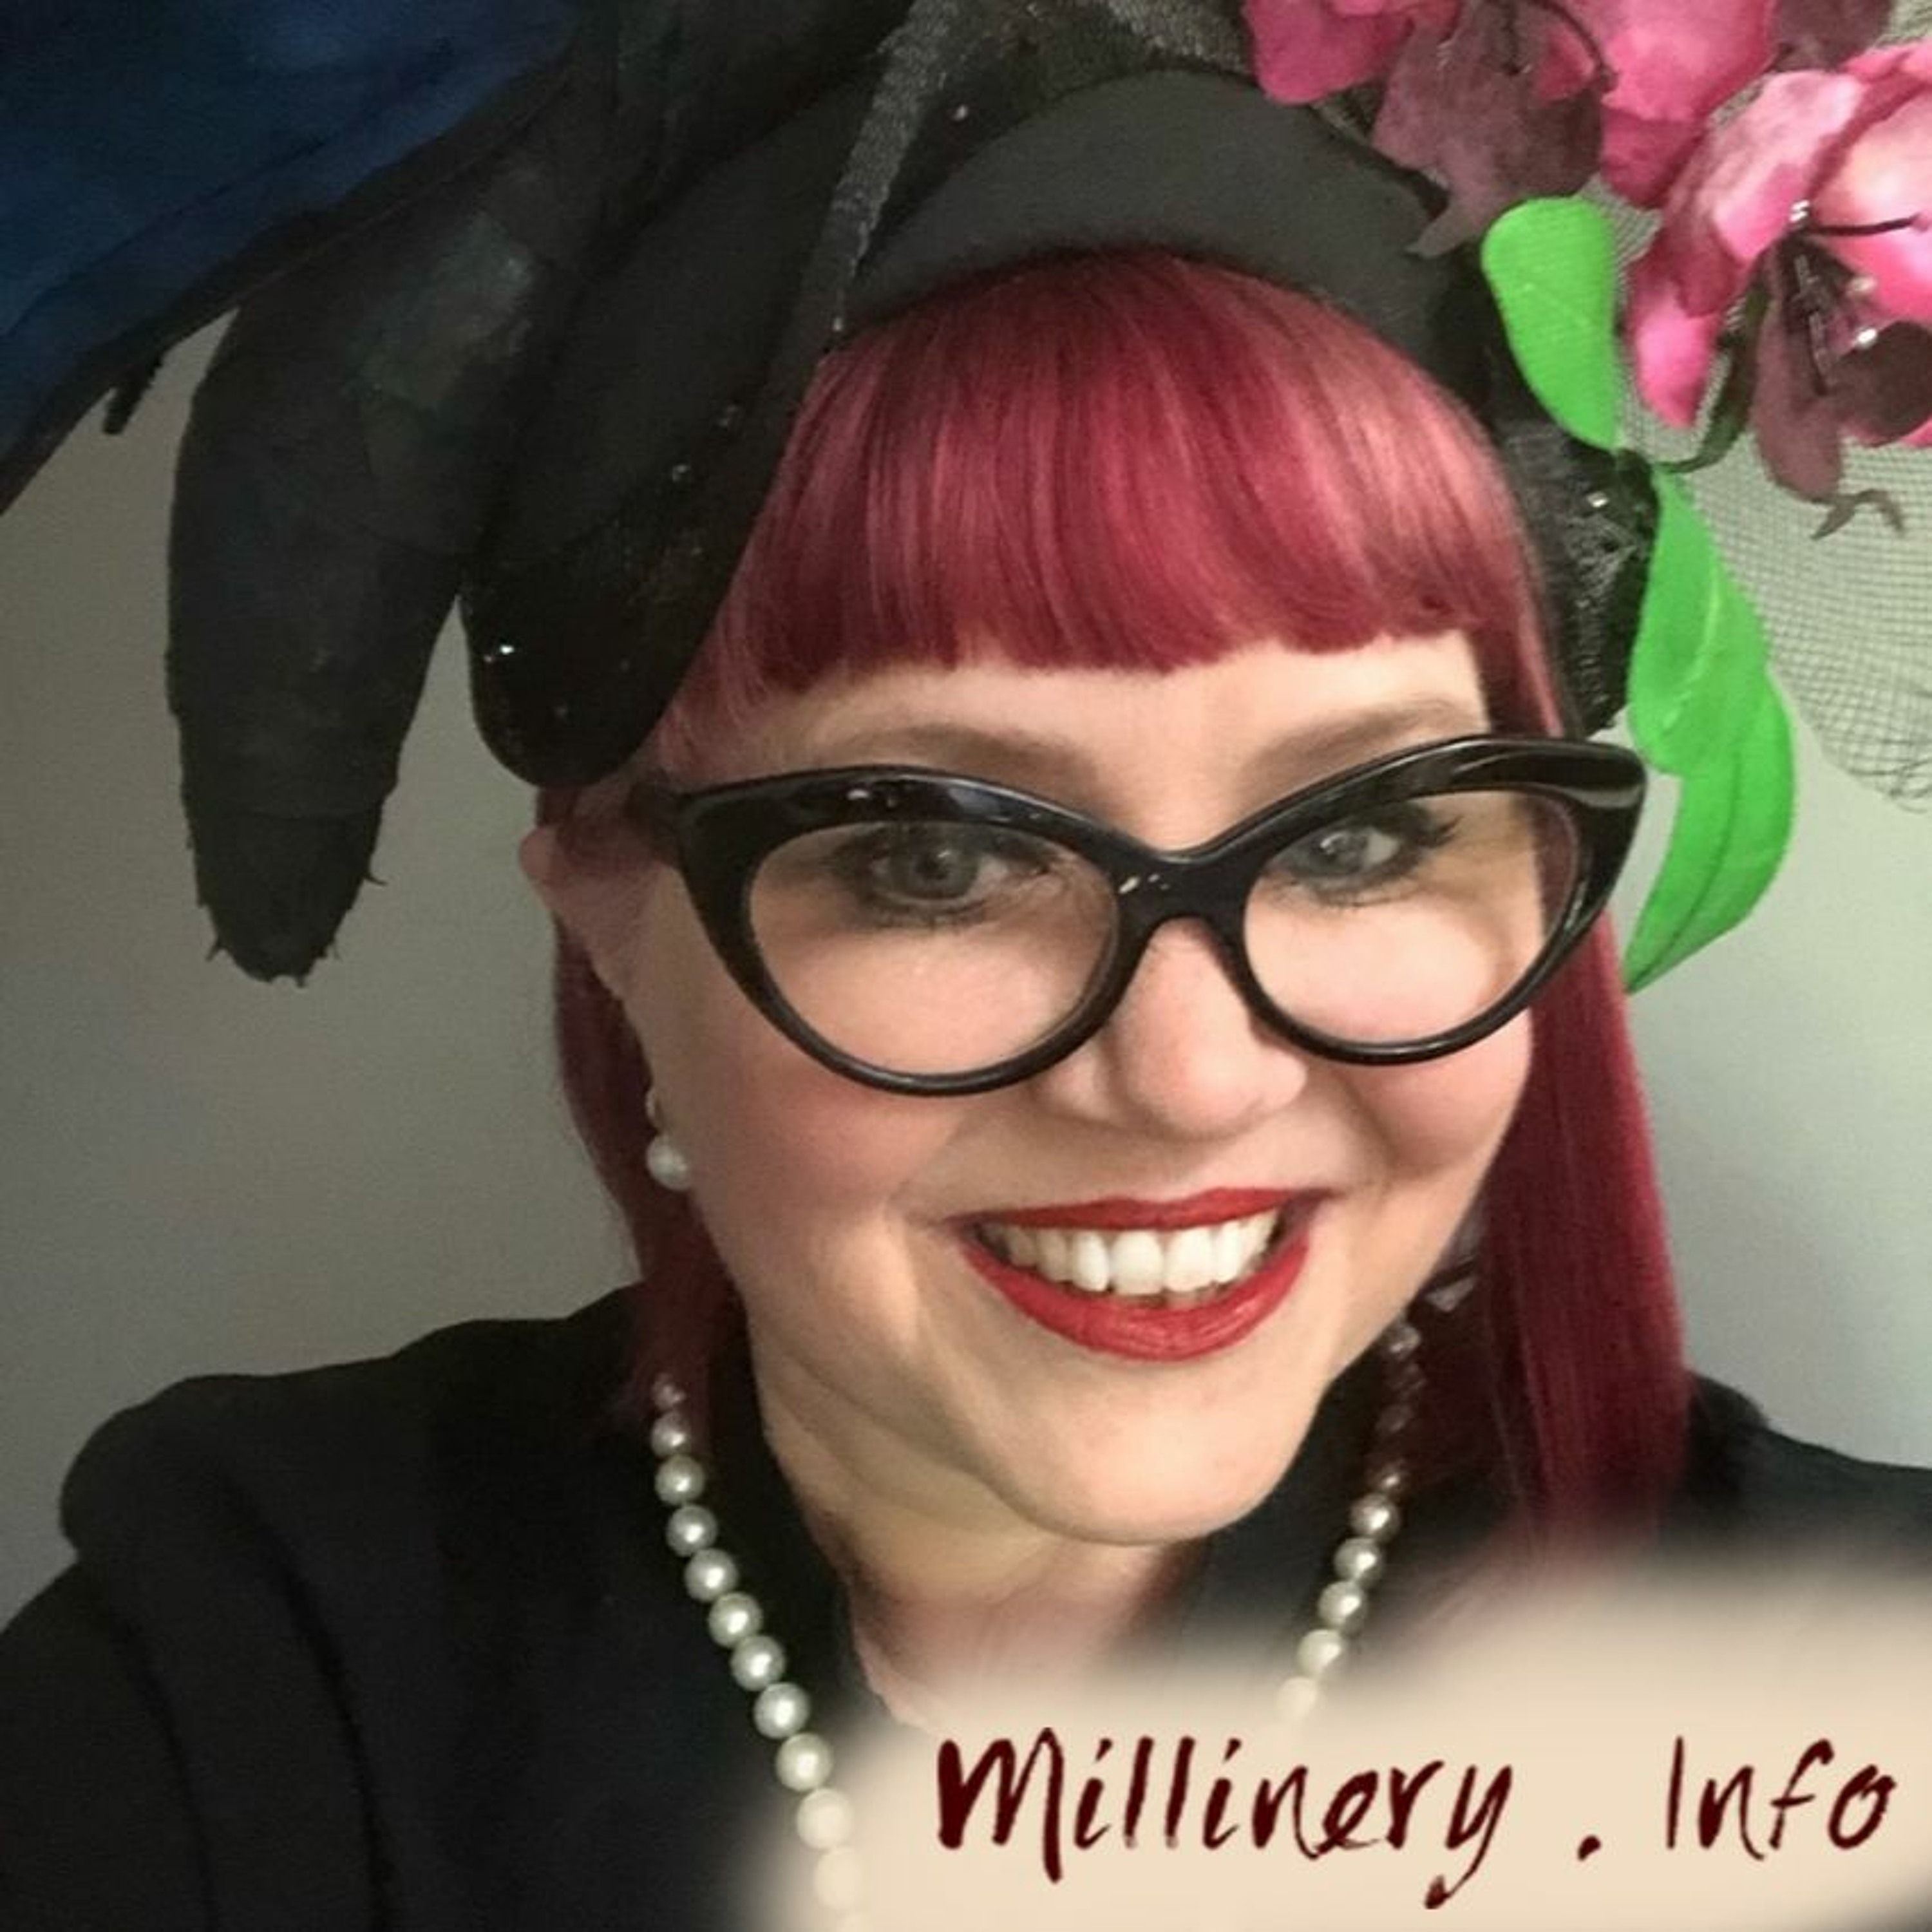 Penelope Gervaise - Millinery.Info Podcast Interview